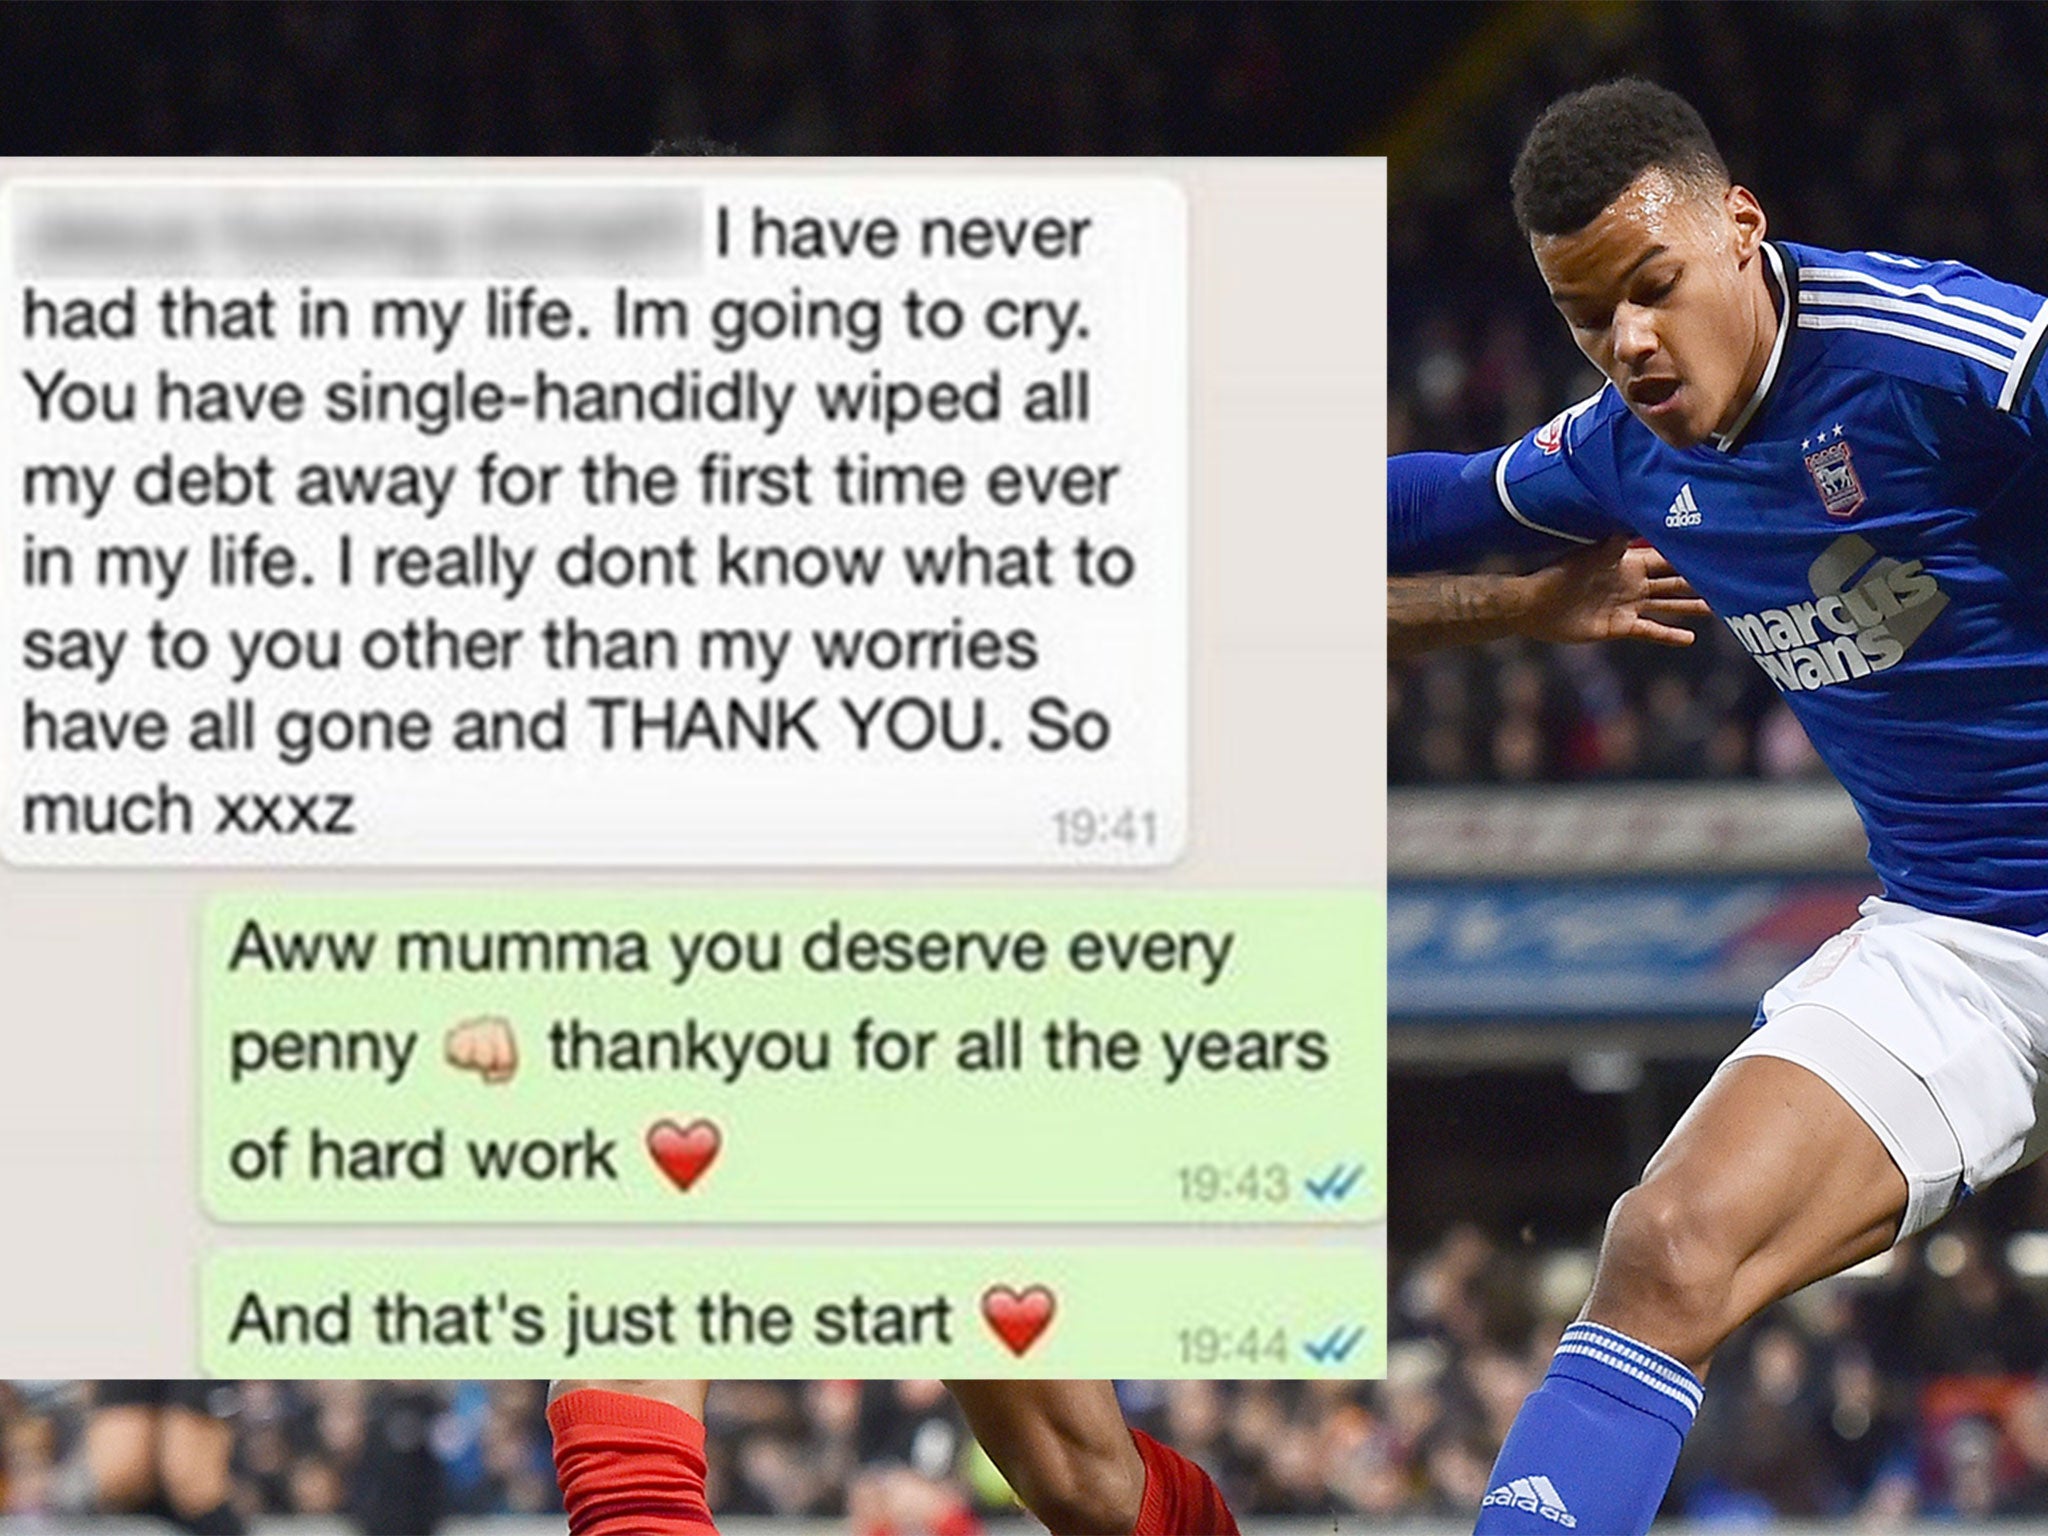 Tyrone Mings (right) and the message exchange with his mother he published on Instagram